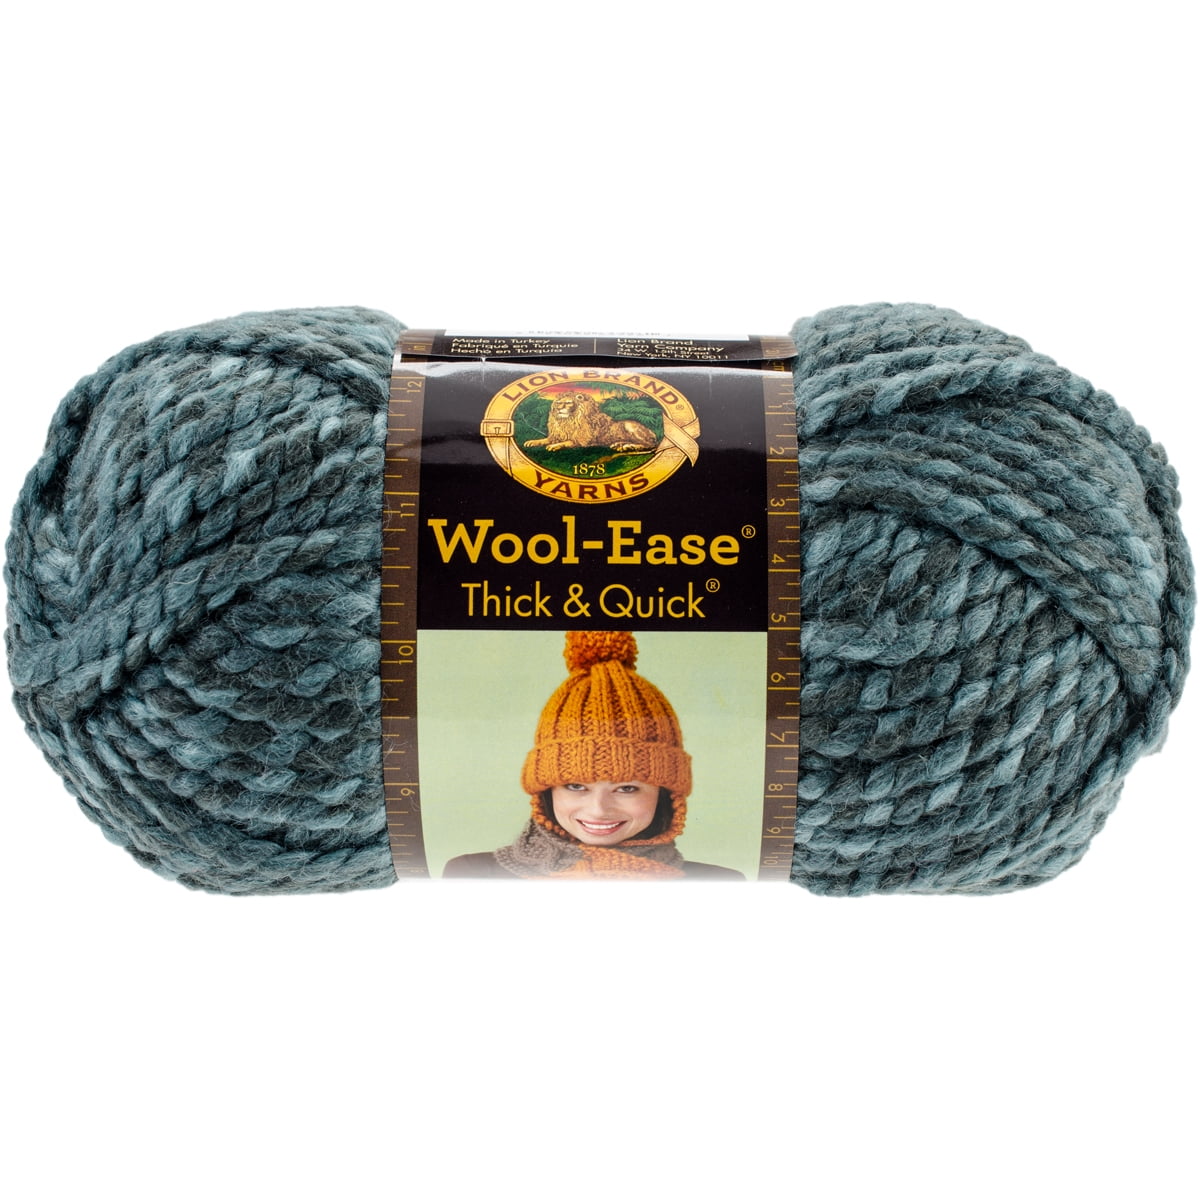 Lion 640-158 Wool-Ease Thick & Quick Yarn , 97 Meters, Mustard